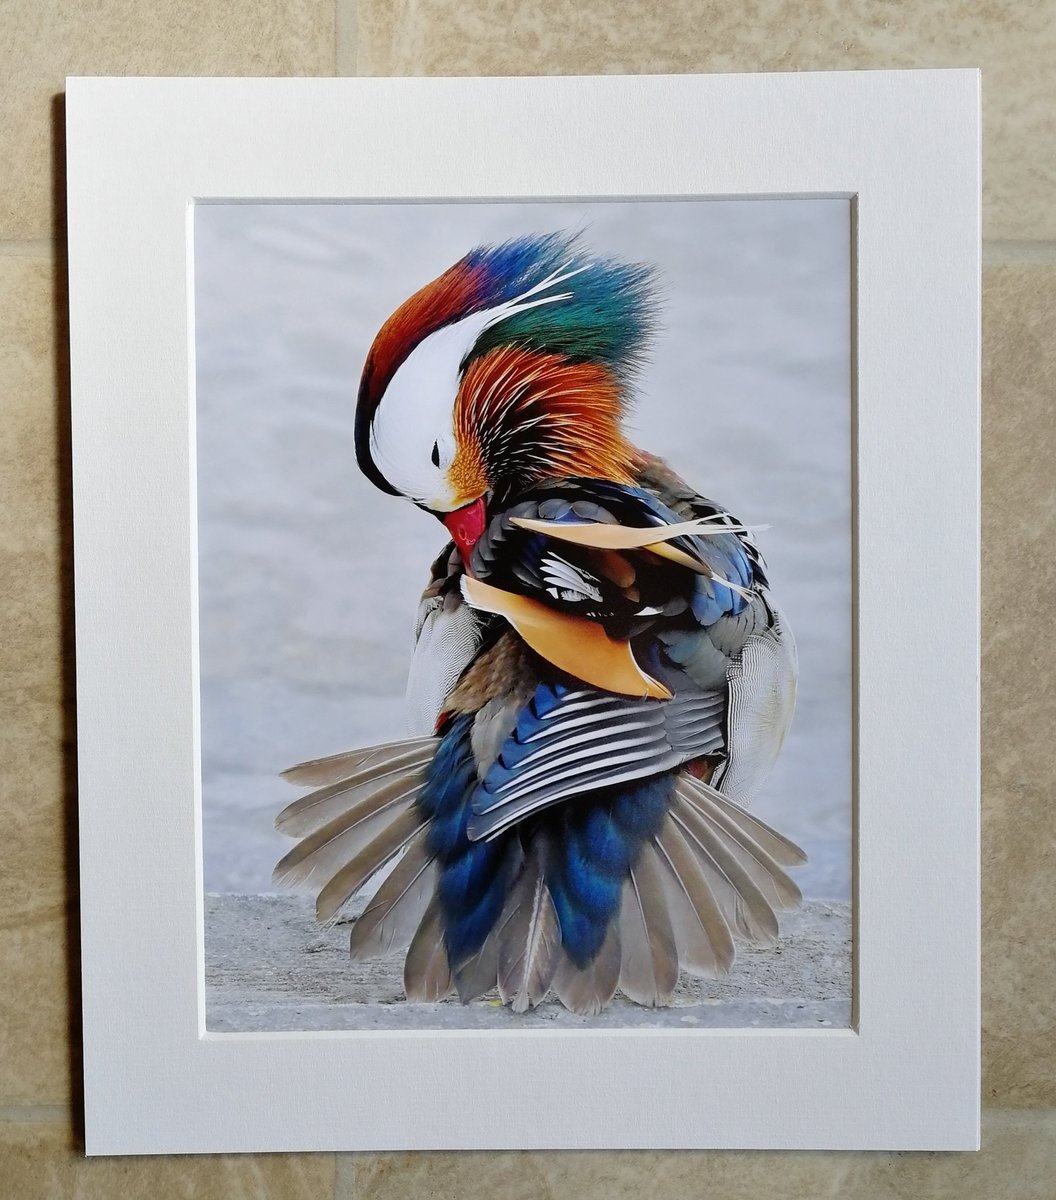 'Male Mandarin' 10x8 mounted print. I can't believe this photo wasn't in my print collection before now, it's one of my most popular ever shots!  Well, it's finally available now, and you can buy it here; https://www.carlbovis.com/product-page/male-mandarin-10x8-mounted-print 